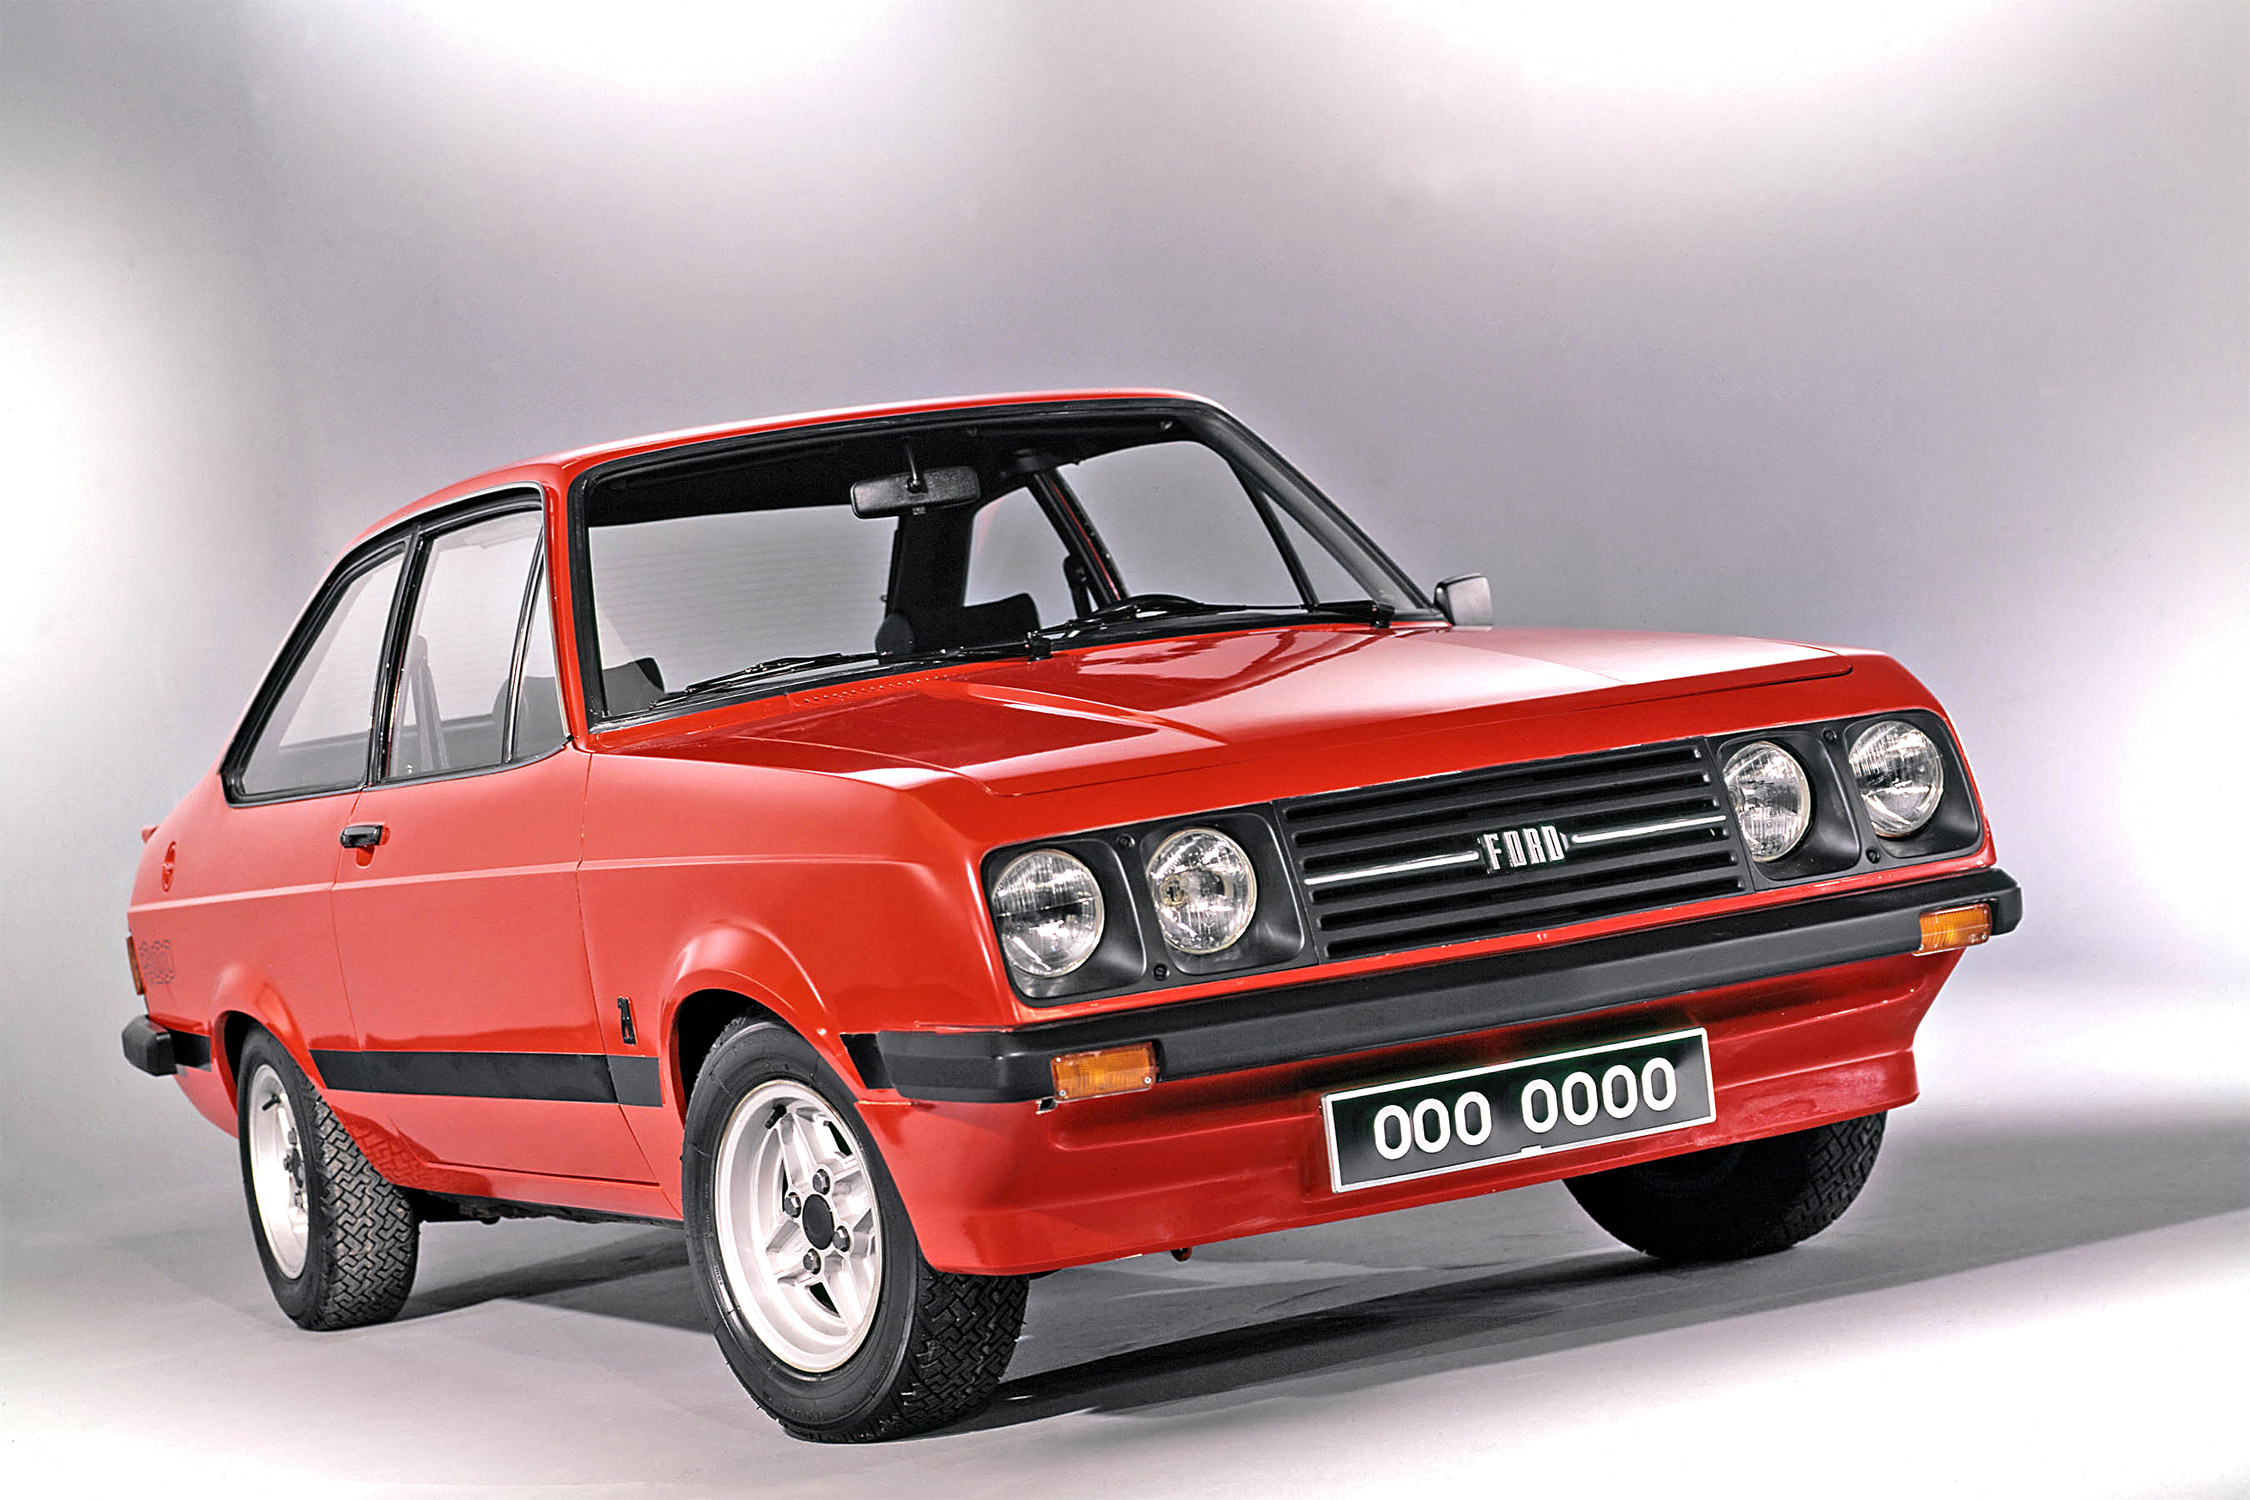 photo FORD ESCORT (Mk II) 2000 RS 110 ch coupé 1975